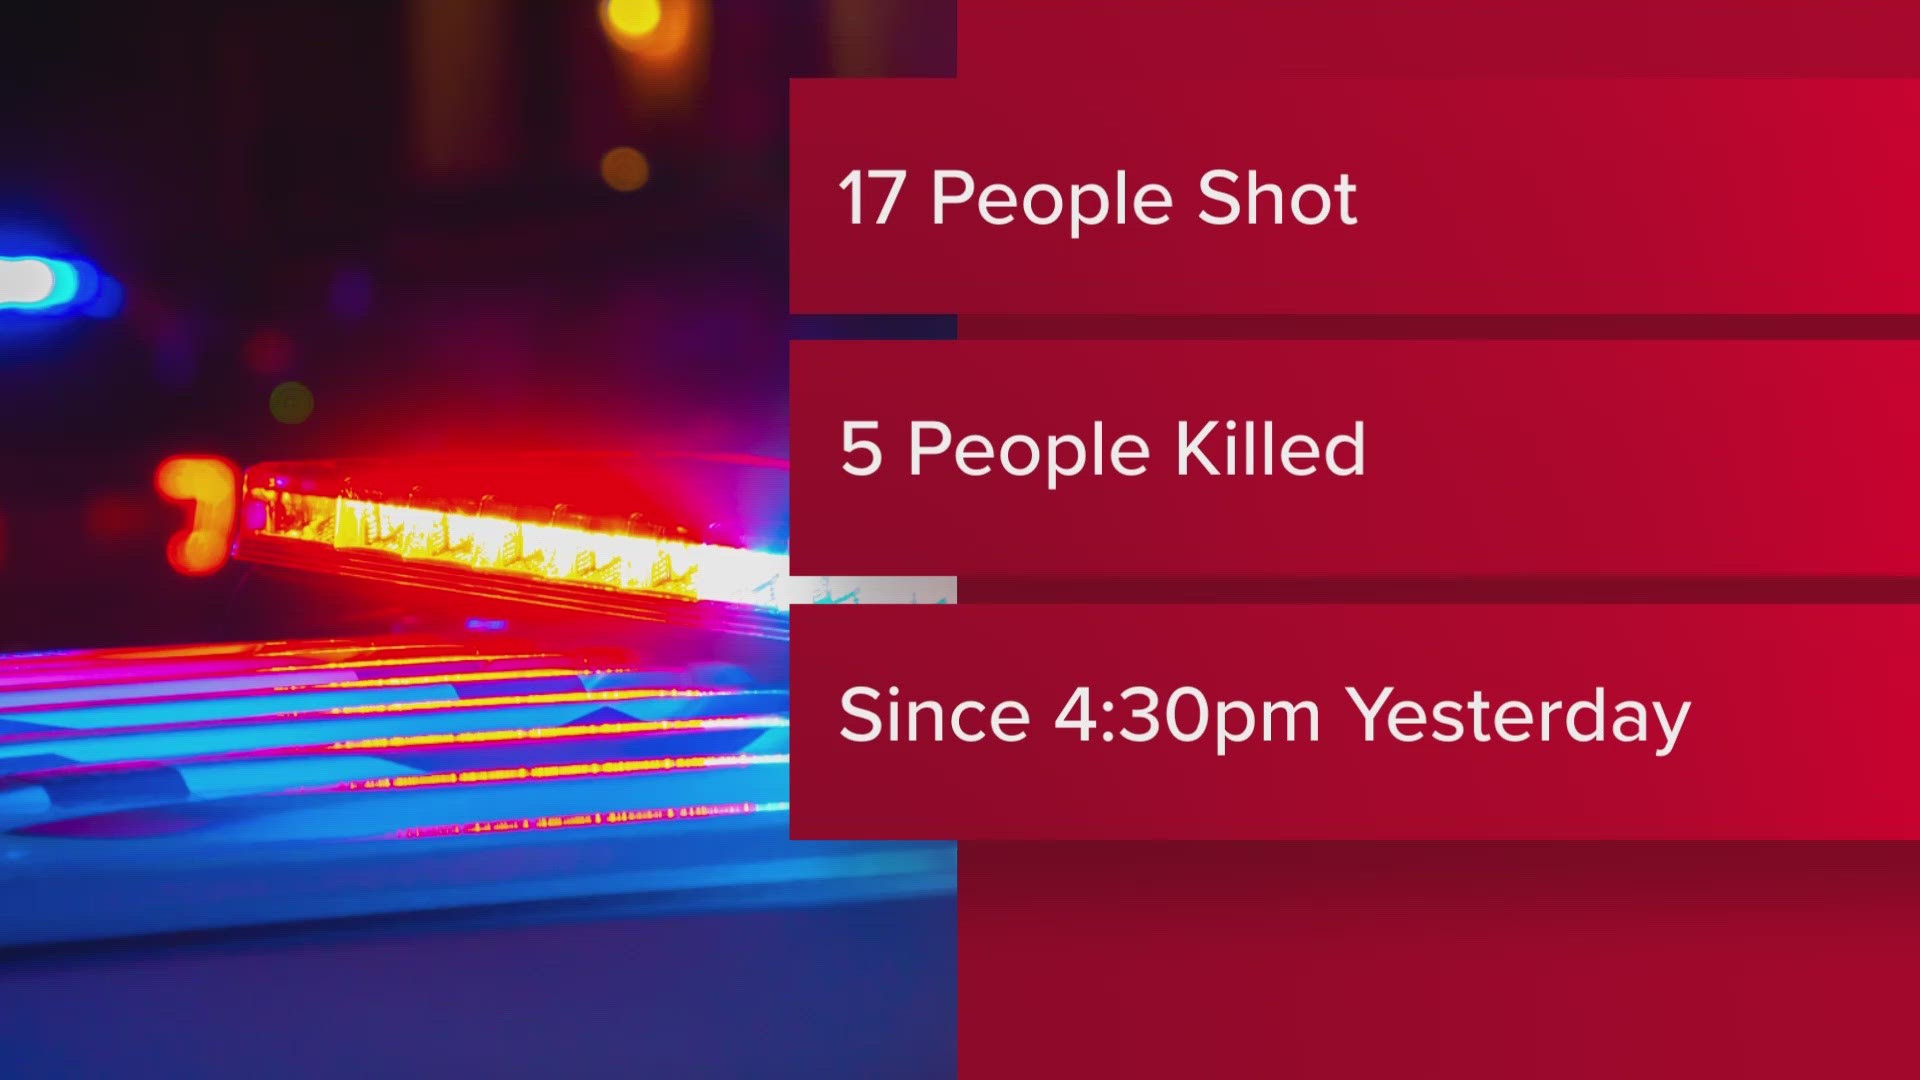 According to WUSA9's count, since 4:30 p.m. on Tuesday, 17 people have been shot with five of them being killed.